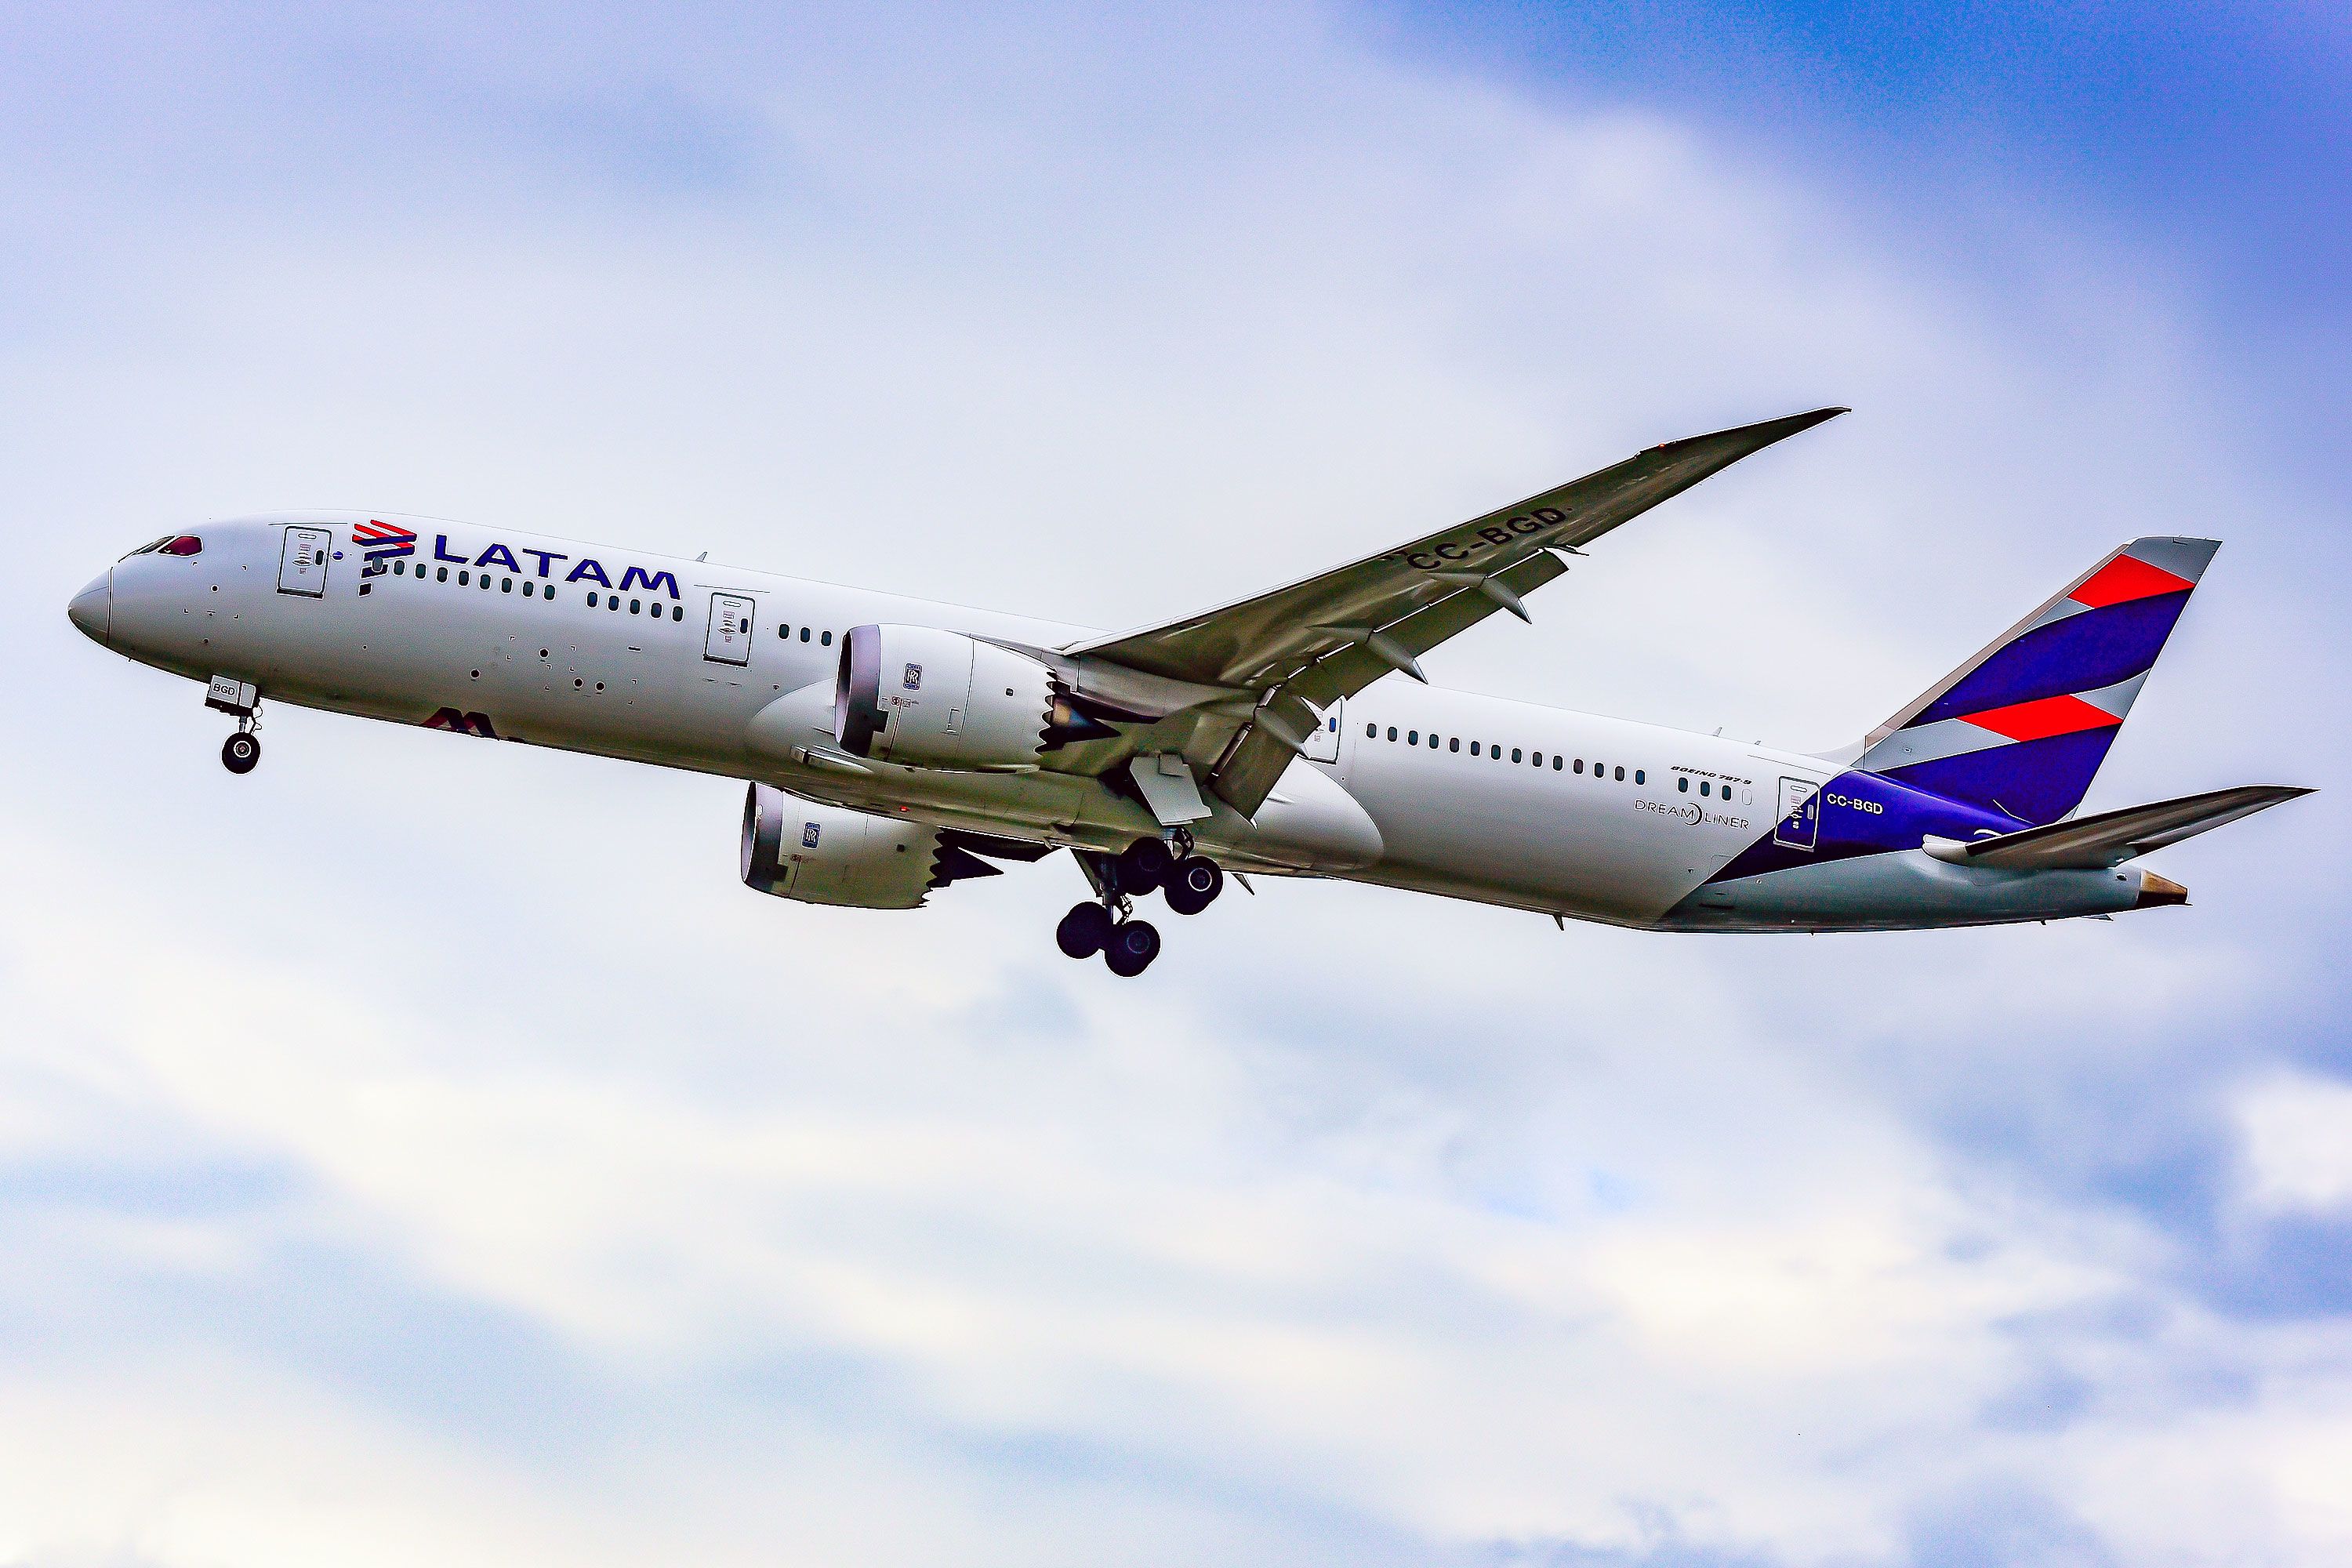 Latin America's largest airline, LATAM, files for Chapter 11